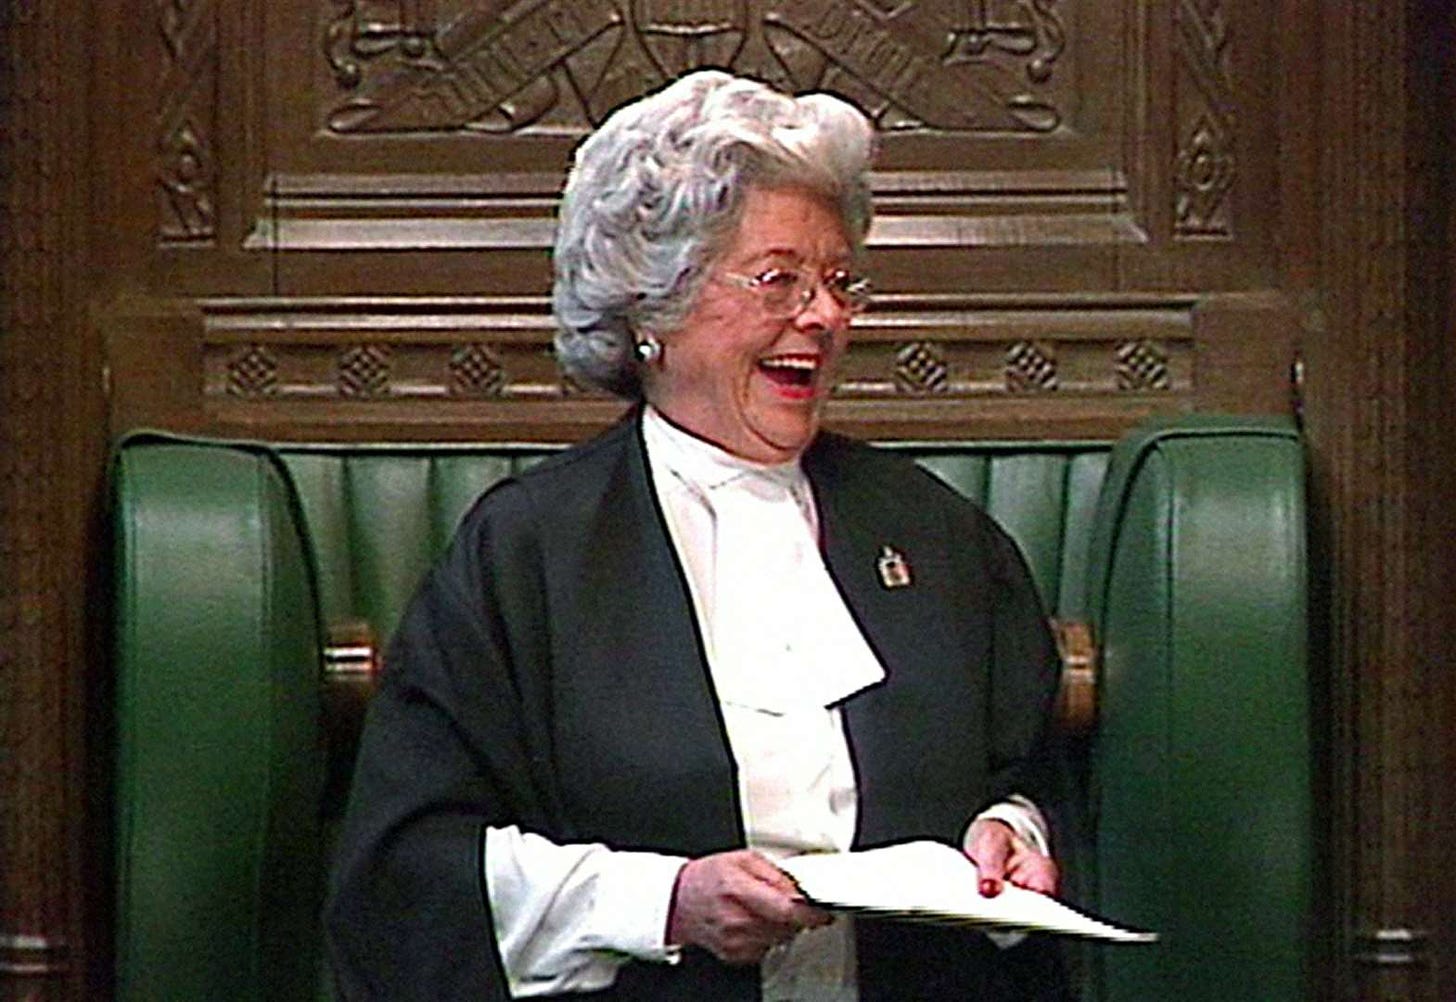 Betty Boothroyd, First Female Speaker of the House